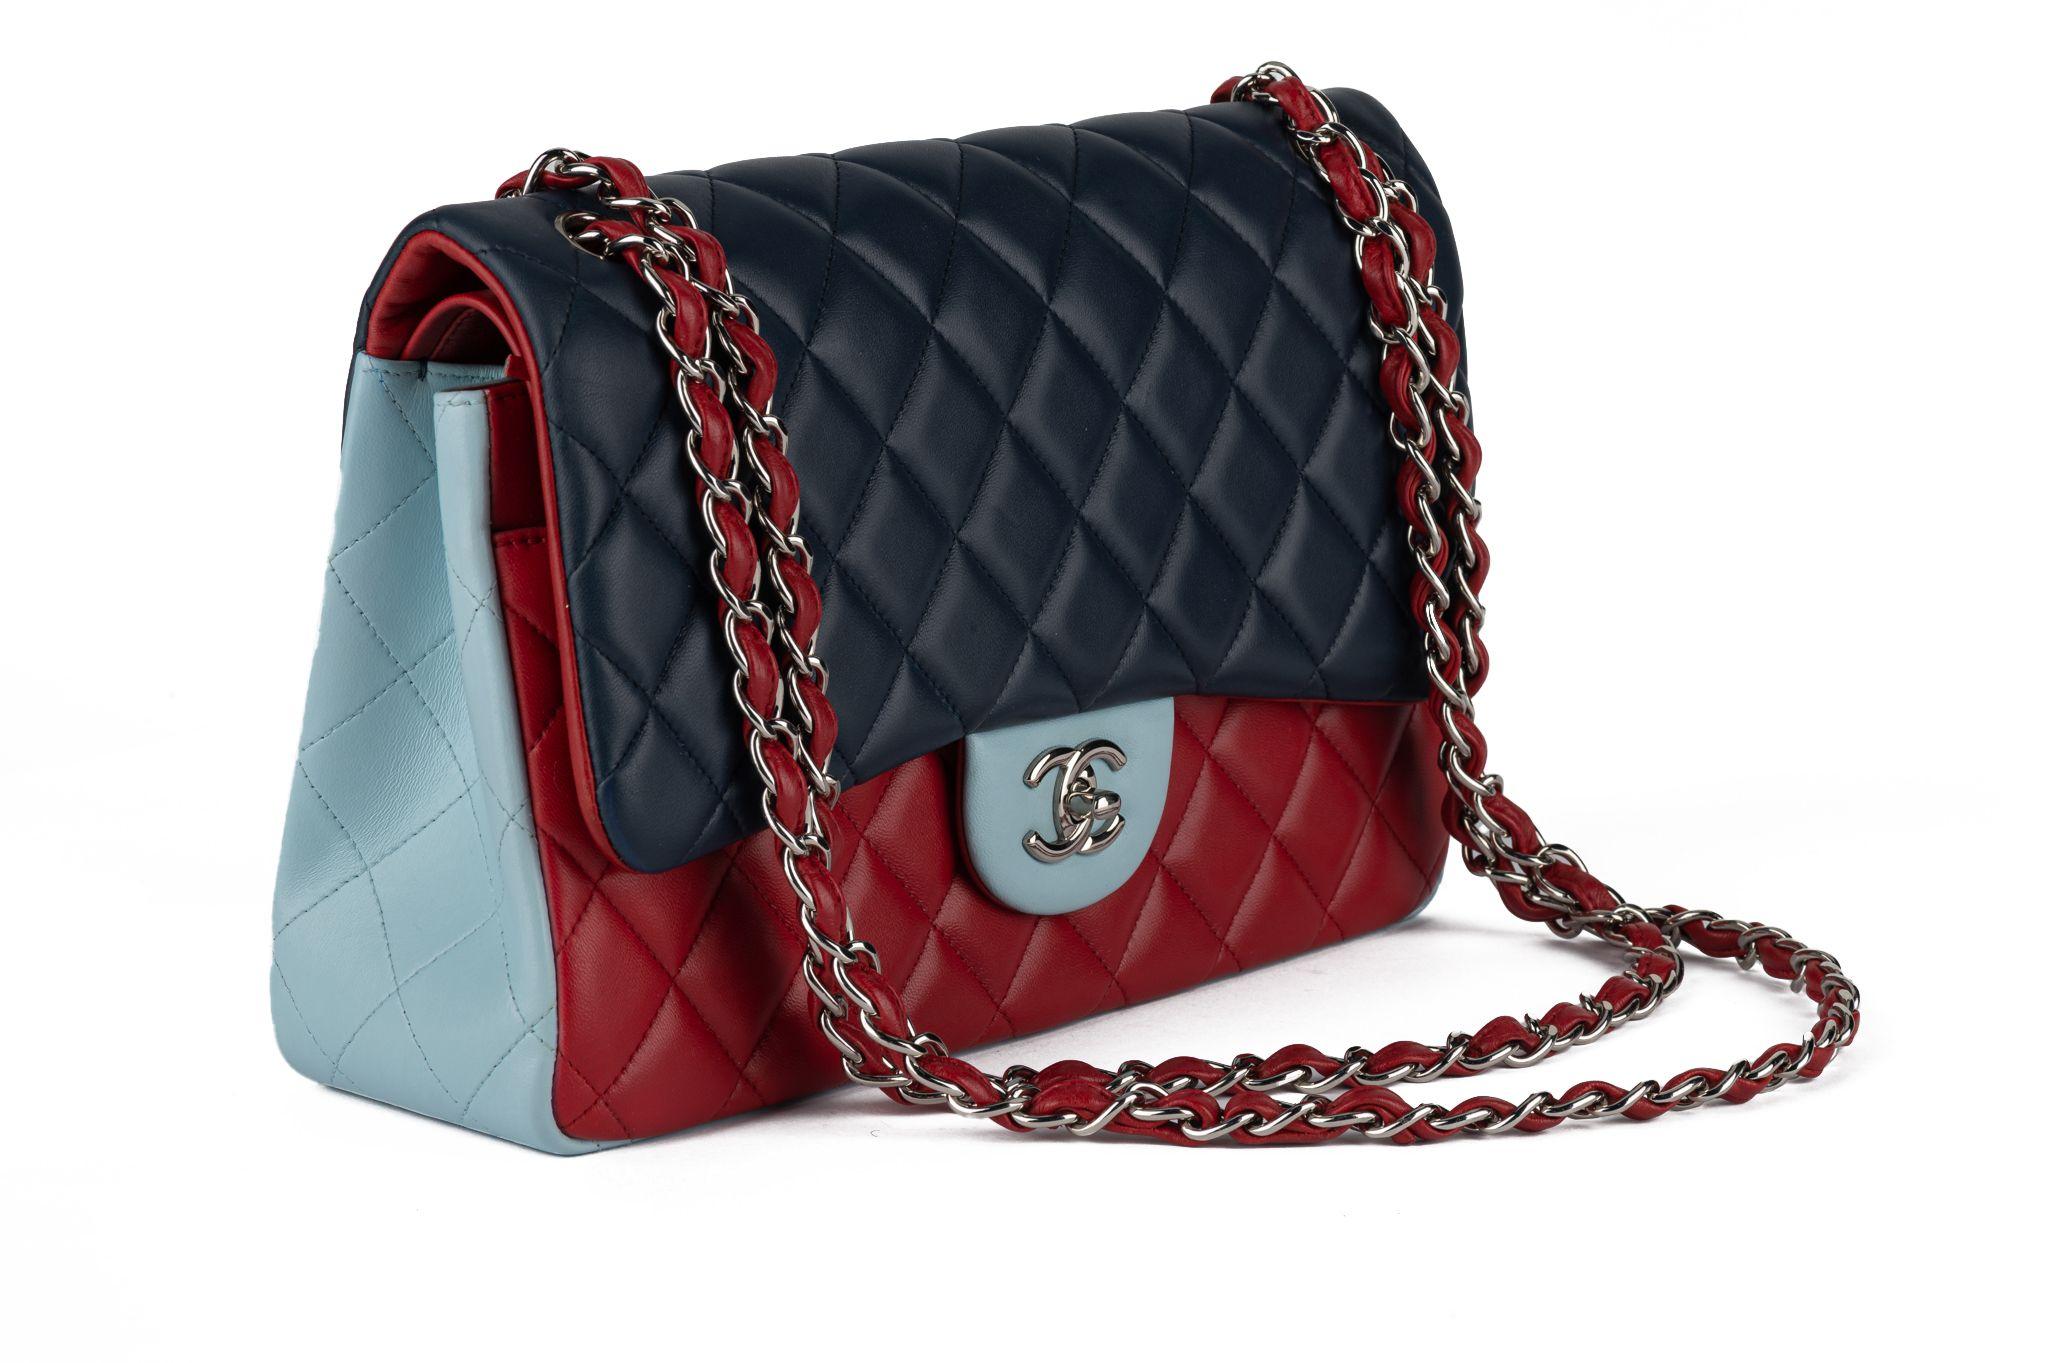 Chanel excellent condition tricolor lambskin jumbo double flap, blue, red, celeste and palladium hardware. Shoulder strap 13.5”. Collection 22. Original dust cover and hologram. Store retail $11,000.